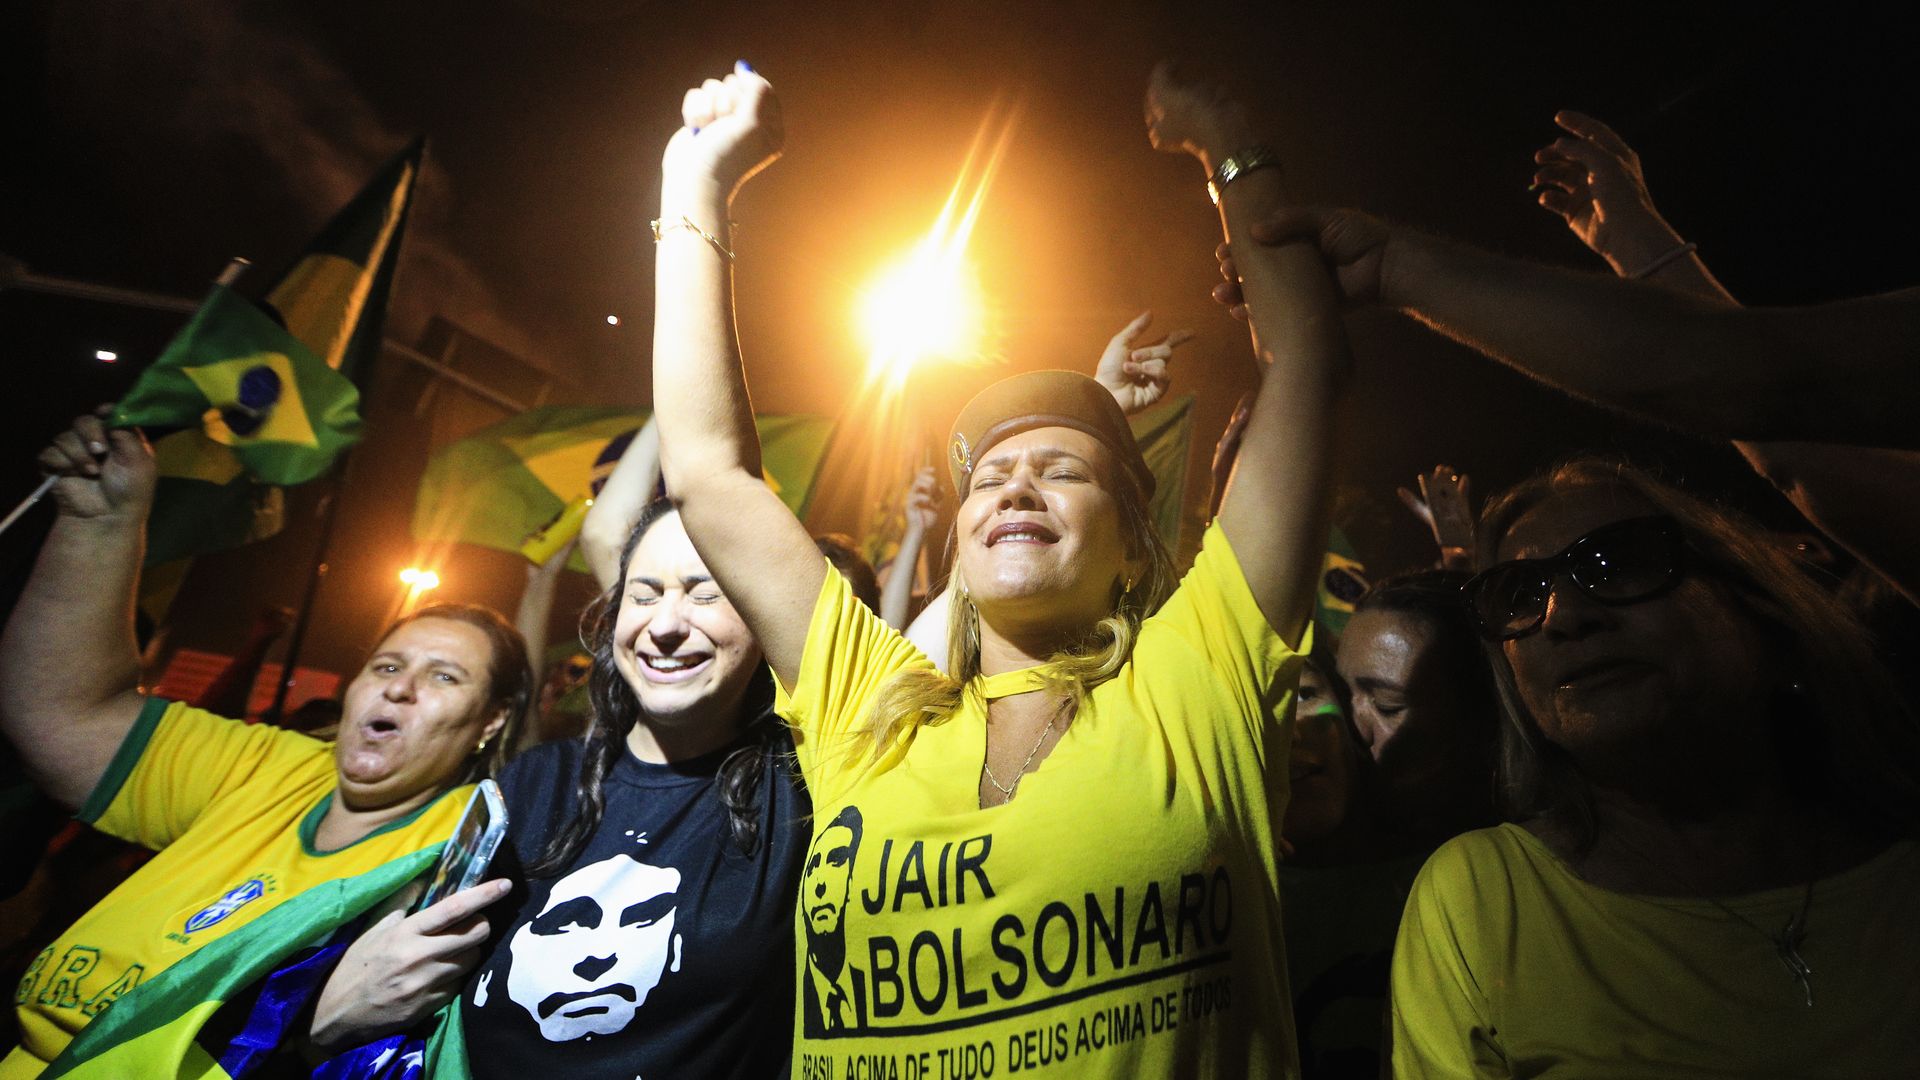 Supporters of far-right presidential candidate Jair Bolsonaro, celebrate in front of his house in Rio de Janeiro, Brazil, after he won Brazil's presidential election, on October 28, 2018